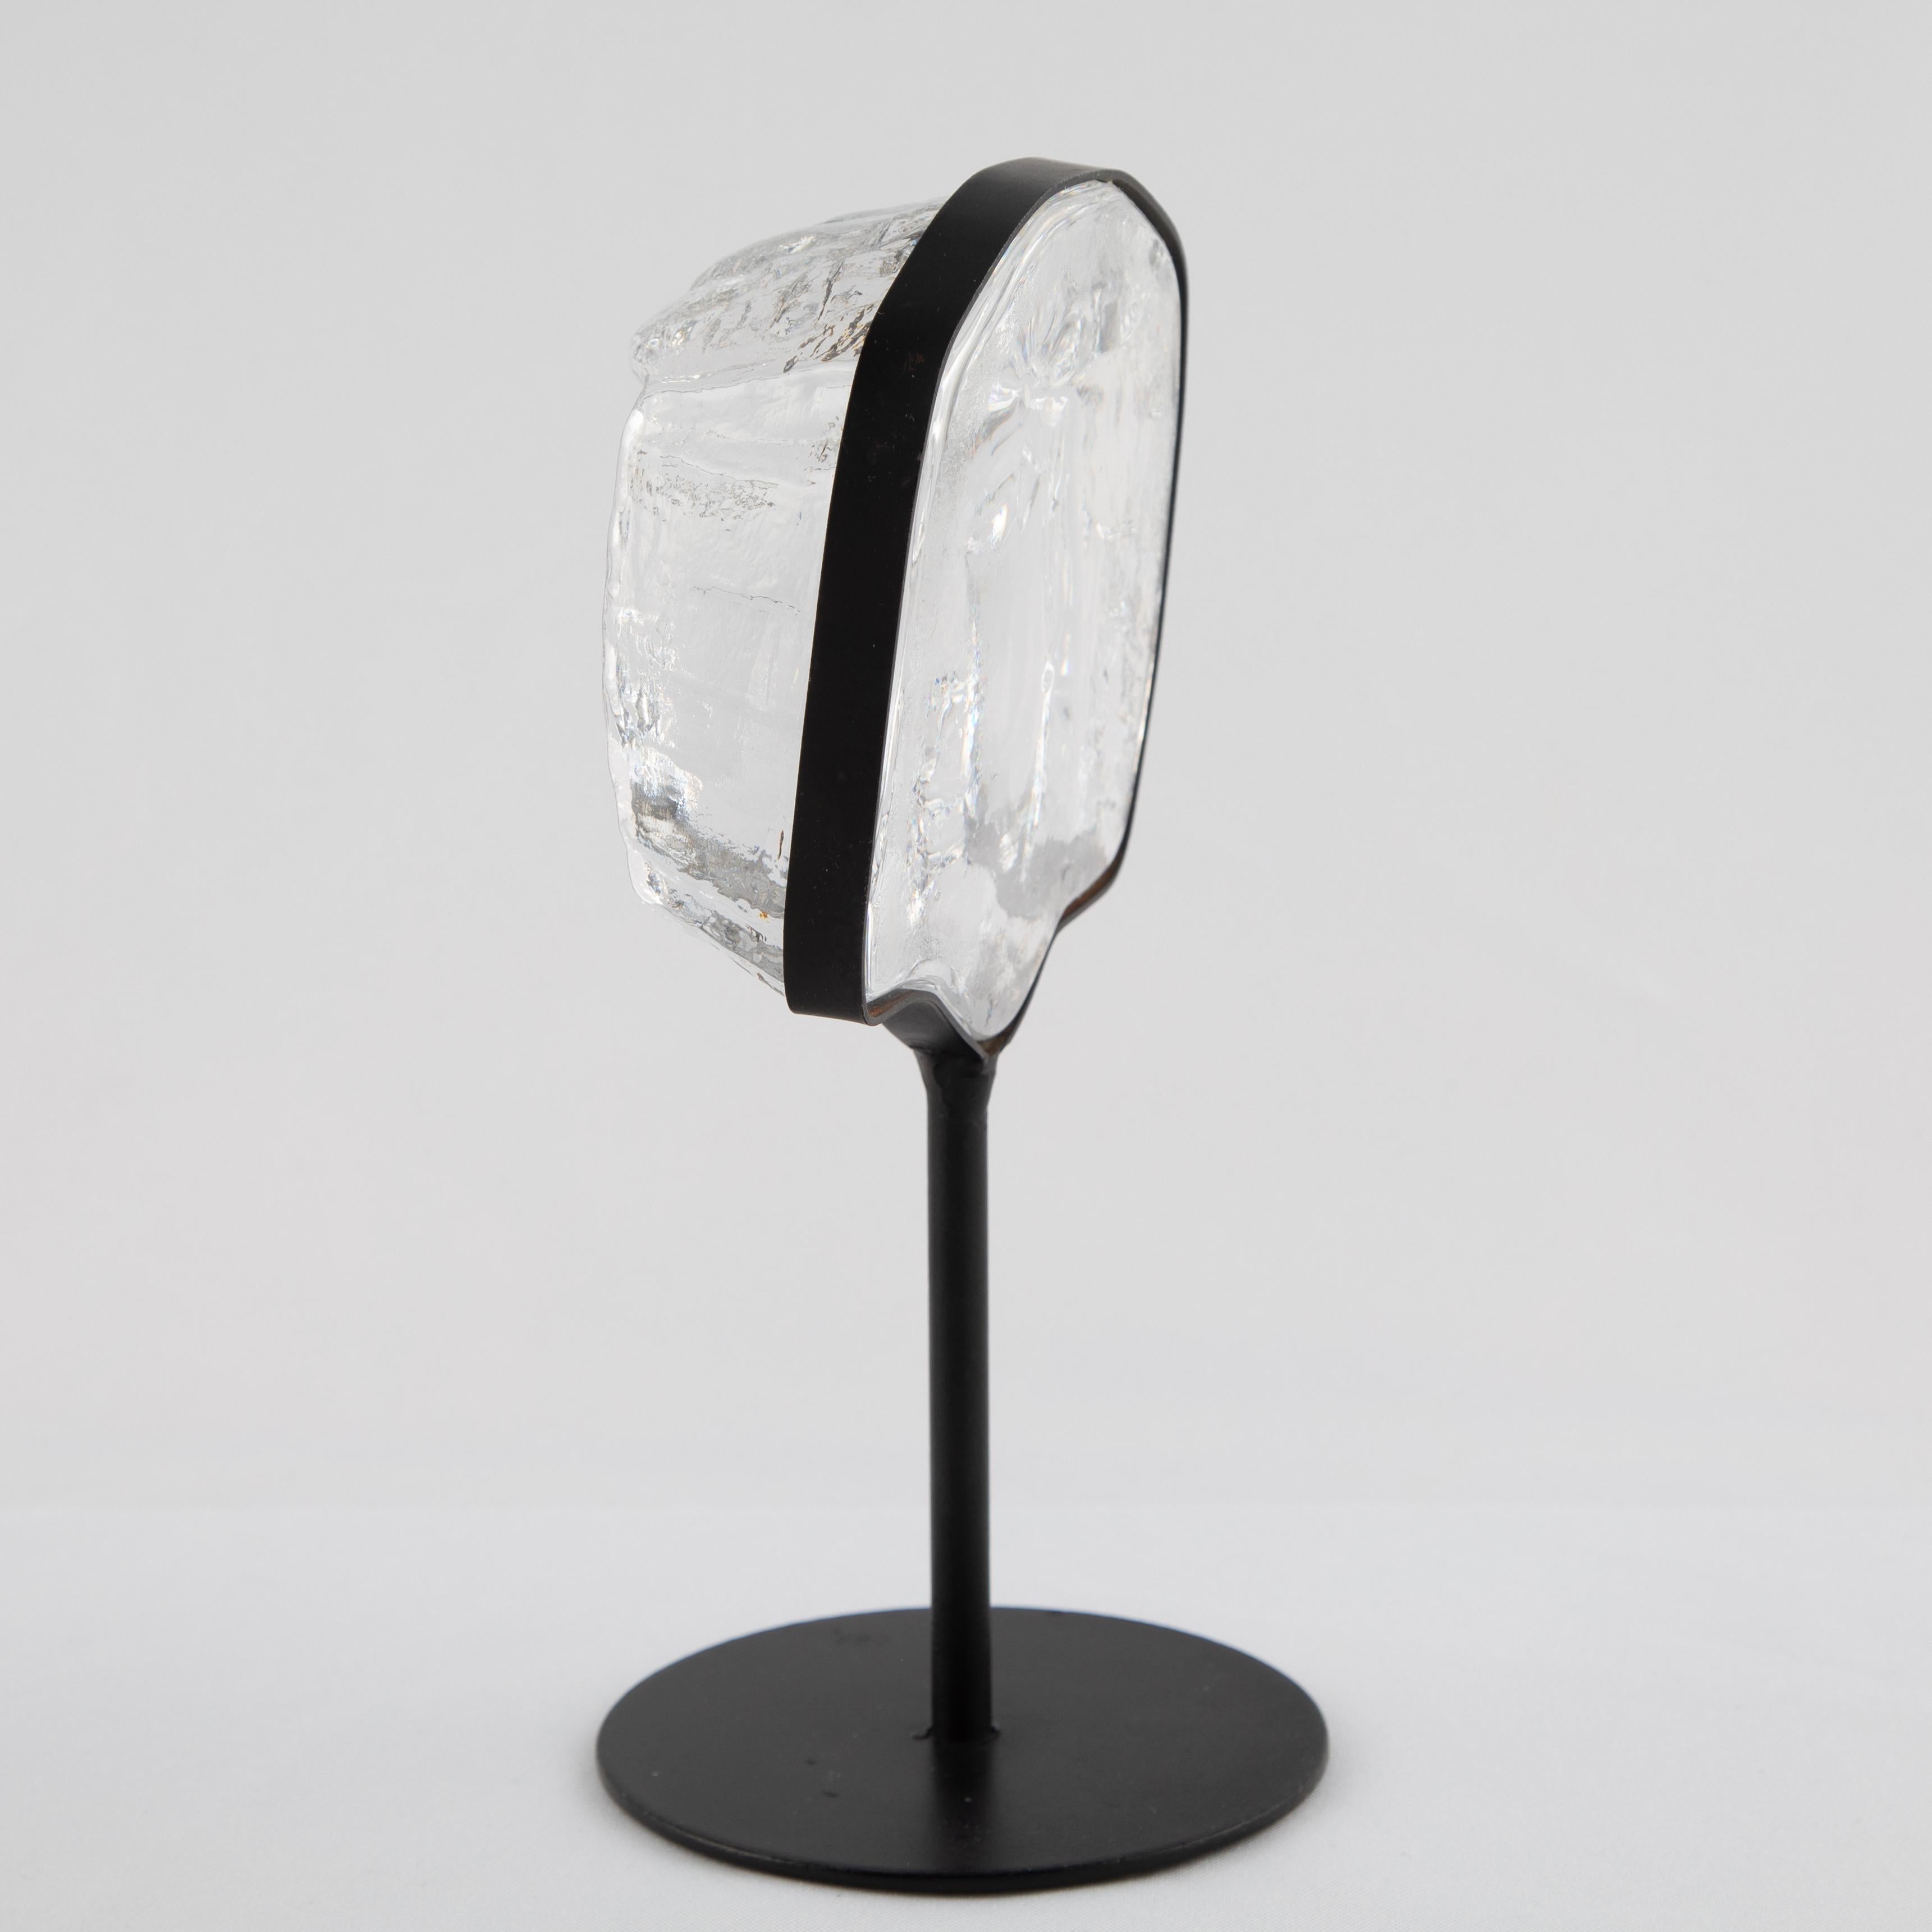 Art Glass Glass Face Sculpture on Iron Stand by Erik Hoglund for Kosta Boda, circa 1960s For Sale